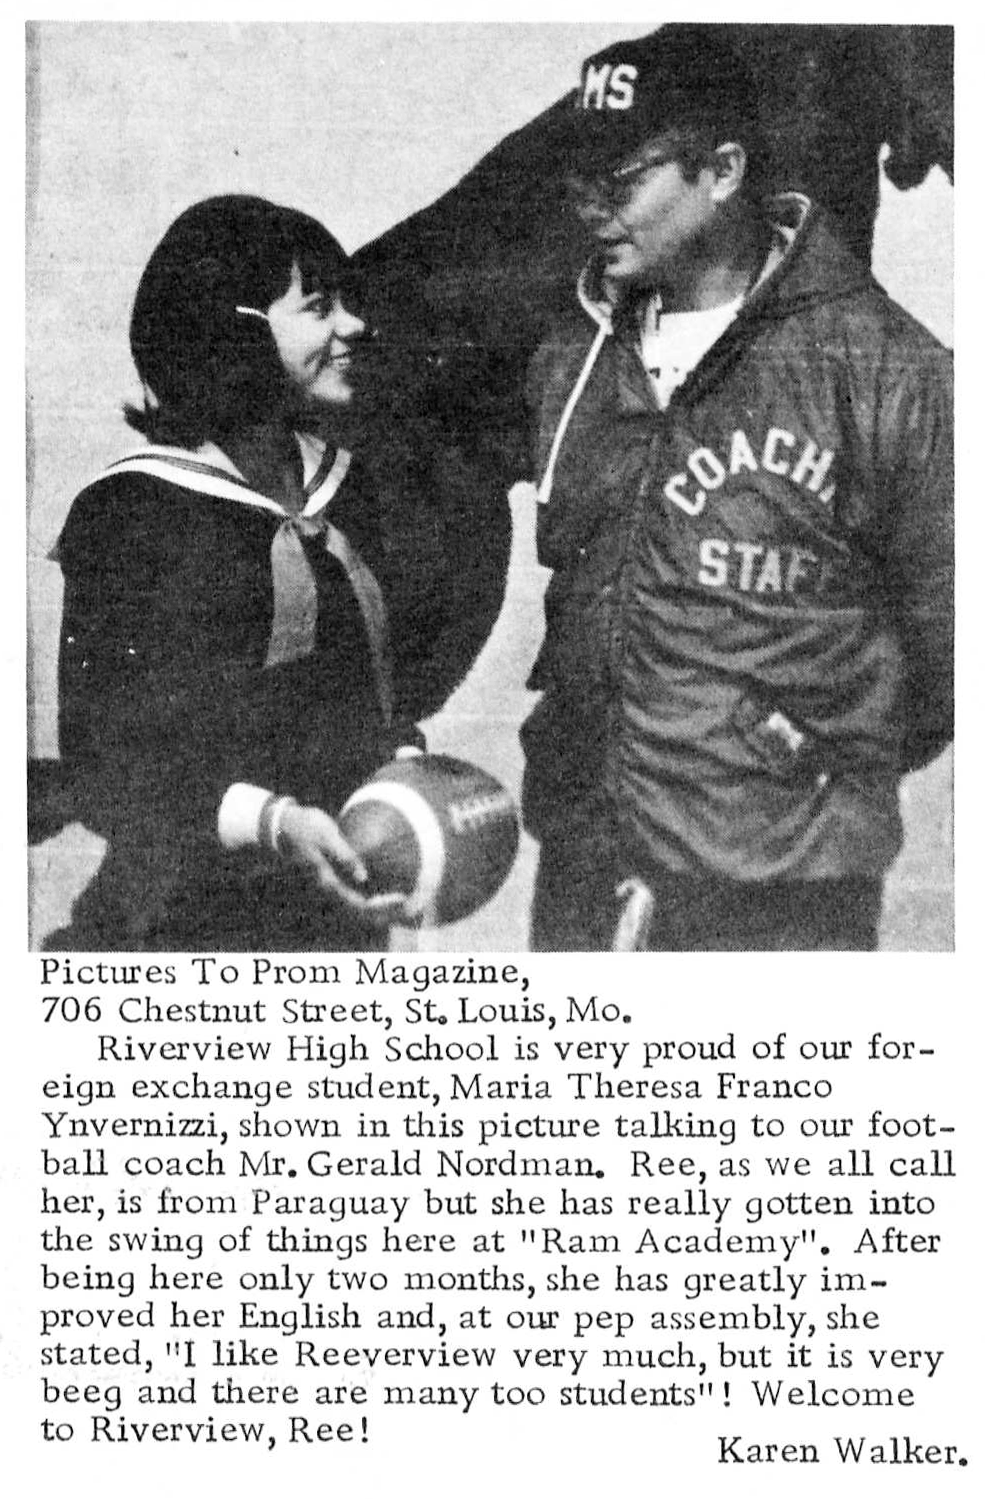 RGHS FOREIGN EXCHANGE STUDENT Ree Franco from Paraguay and RGHS FOOTBALL COACH Gerald Nordman photo appears in PROM MAGAZINE NOVEMBER 1967.